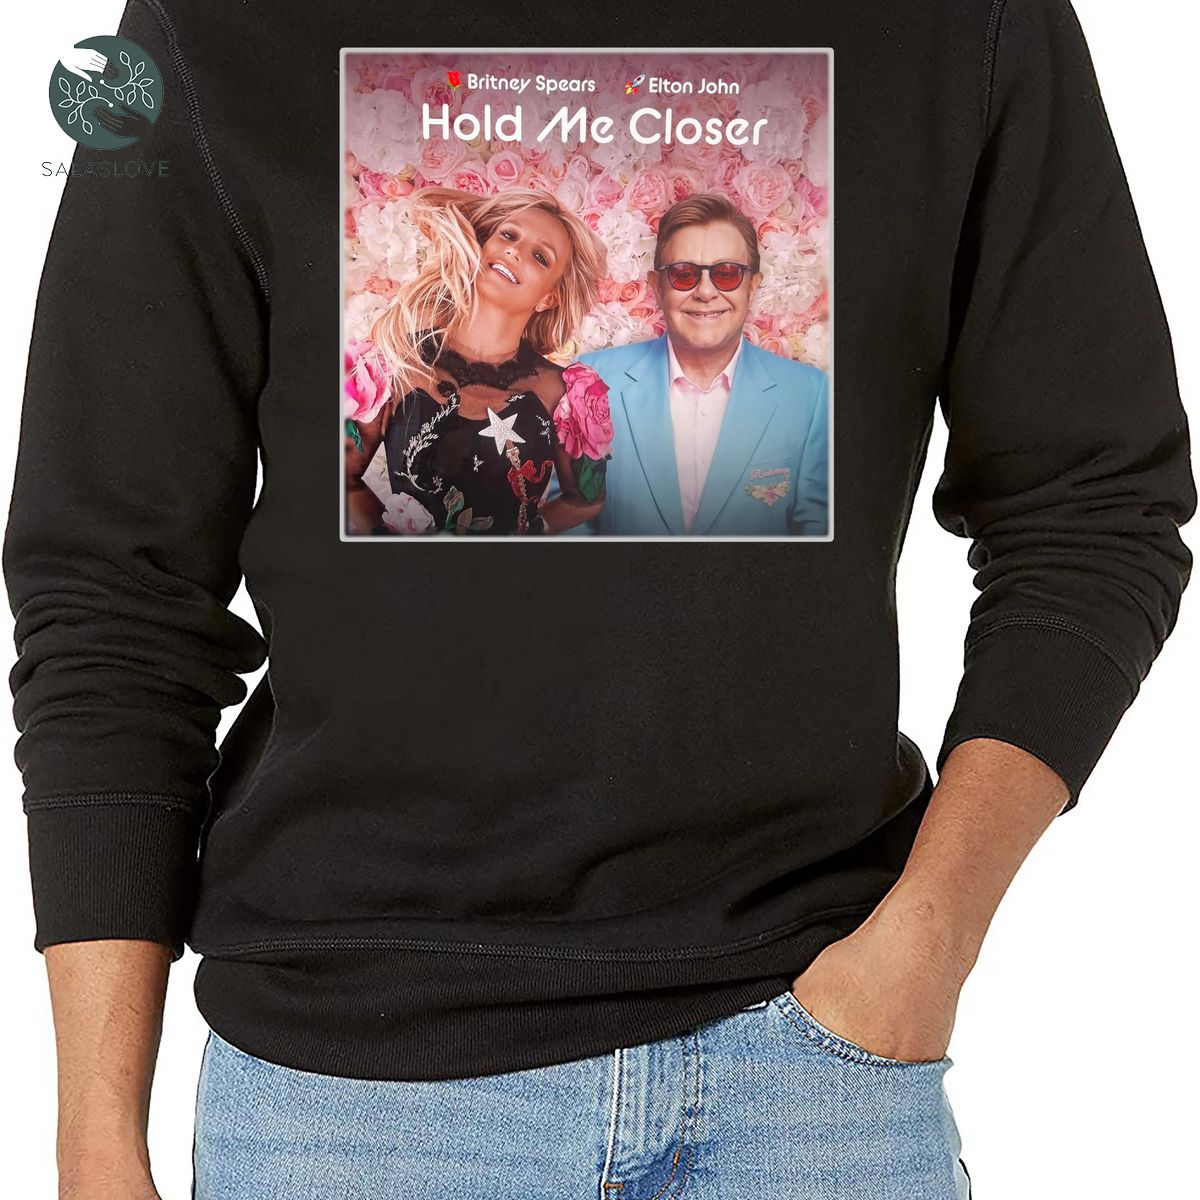 Hold Me Closer By Elton John and Britney Spears Shirt